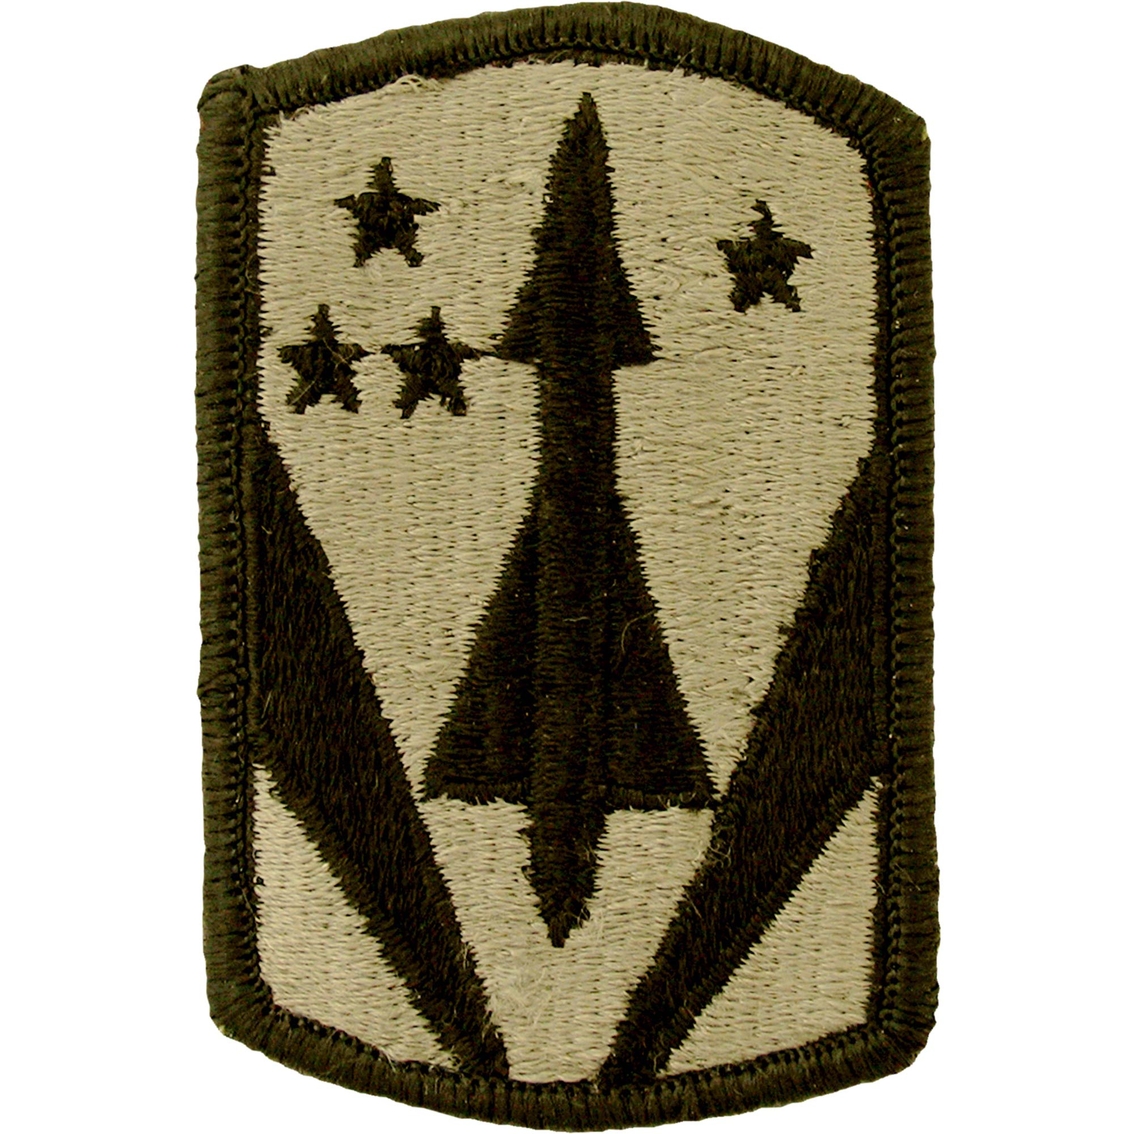 OCP Scorpion Patch with Hook Fastener 31st Air Defense Artillery 